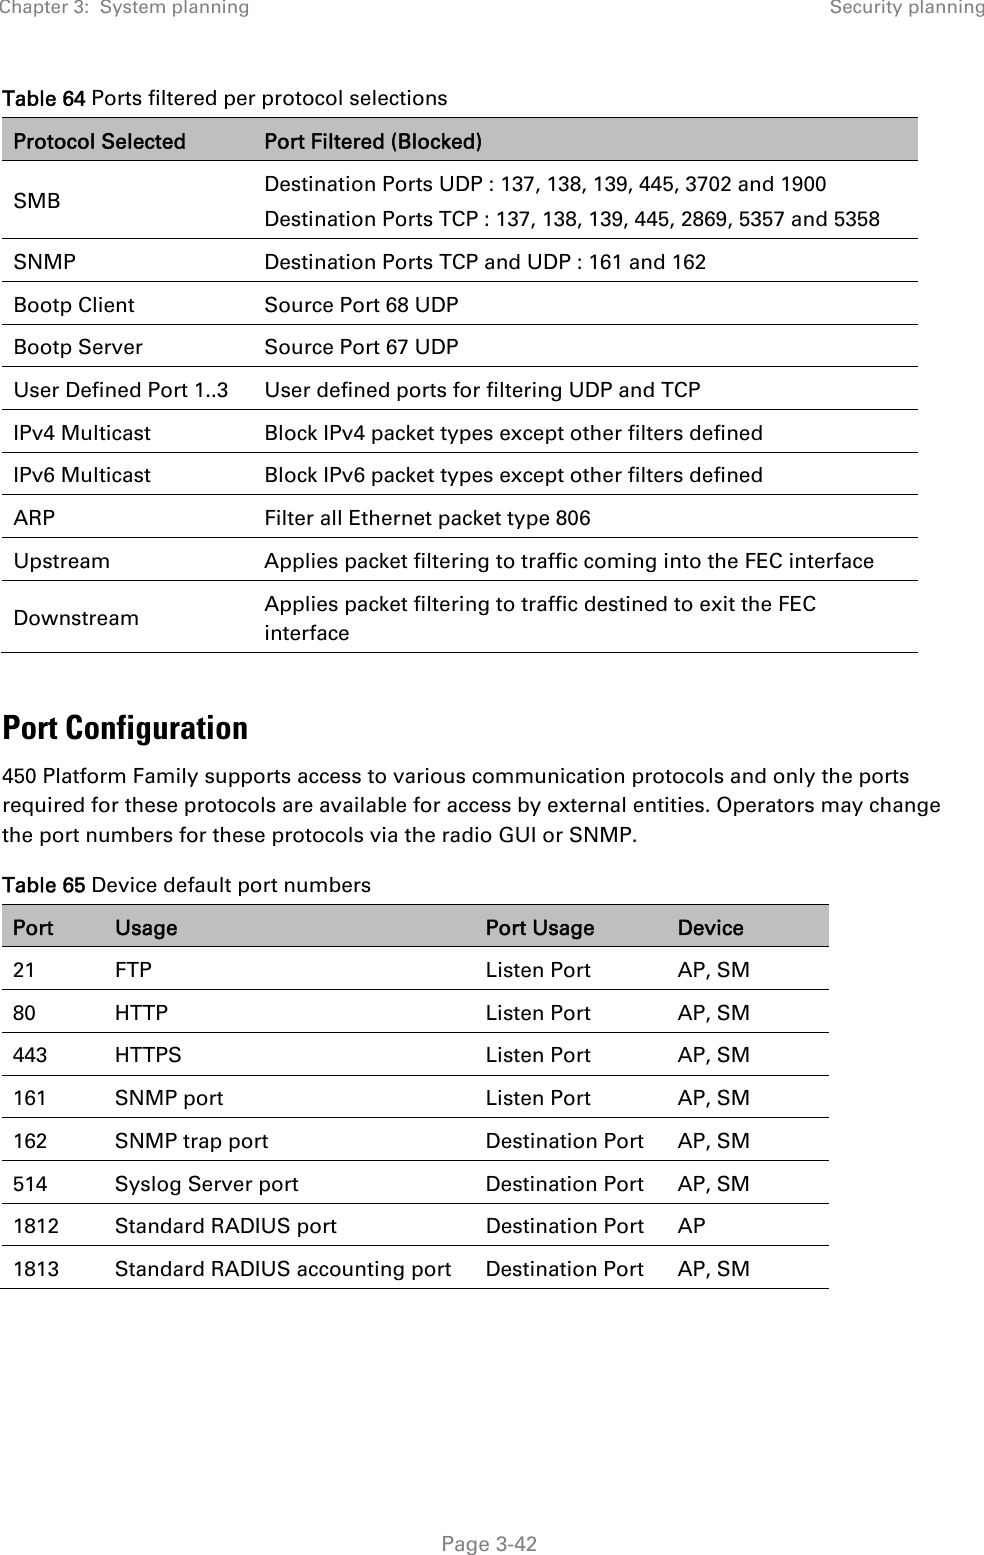 Chapter 3:  System planning  Security planning   Page 3-42 Table 64 Ports filtered per protocol selections   Port Configuration 450 Platform Family supports access to various communication protocols and only the ports required for these protocols are available for access by external entities. Operators may change the port numbers for these protocols via the radio GUI or SNMP. Table 65 Device default port numbers Port  Usage  Port Usage  Device 21 FTP  Listen Port  AP, SM 80 HTTP  Listen Port  AP, SM 443 HTTPS  Listen Port  AP, SM 161  SNMP port  Listen Port  AP, SM 162  SNMP trap port  Destination Port  AP, SM 514  Syslog Server port  Destination Port  AP, SM 1812  Standard RADIUS port  Destination Port  AP 1813  Standard RADIUS accounting port  Destination Port  AP, SM    Protocol Selected  Port Filtered (Blocked) SMB  Destination Ports UDP : 137, 138, 139, 445, 3702 and 1900 Destination Ports TCP : 137, 138, 139, 445, 2869, 5357 and 5358 SNMP  Destination Ports TCP and UDP : 161 and 162 Bootp Client  Source Port 68 UDP Bootp Server  Source Port 67 UDP User Defined Port 1..3  User defined ports for filtering UDP and TCP IPv4 Multicast  Block IPv4 packet types except other filters defined IPv6 Multicast  Block IPv6 packet types except other filters defined ARP  Filter all Ethernet packet type 806 Upstream   Applies packet filtering to traffic coming into the FEC interface Downstream  Applies packet filtering to traffic destined to exit the FEC interface 